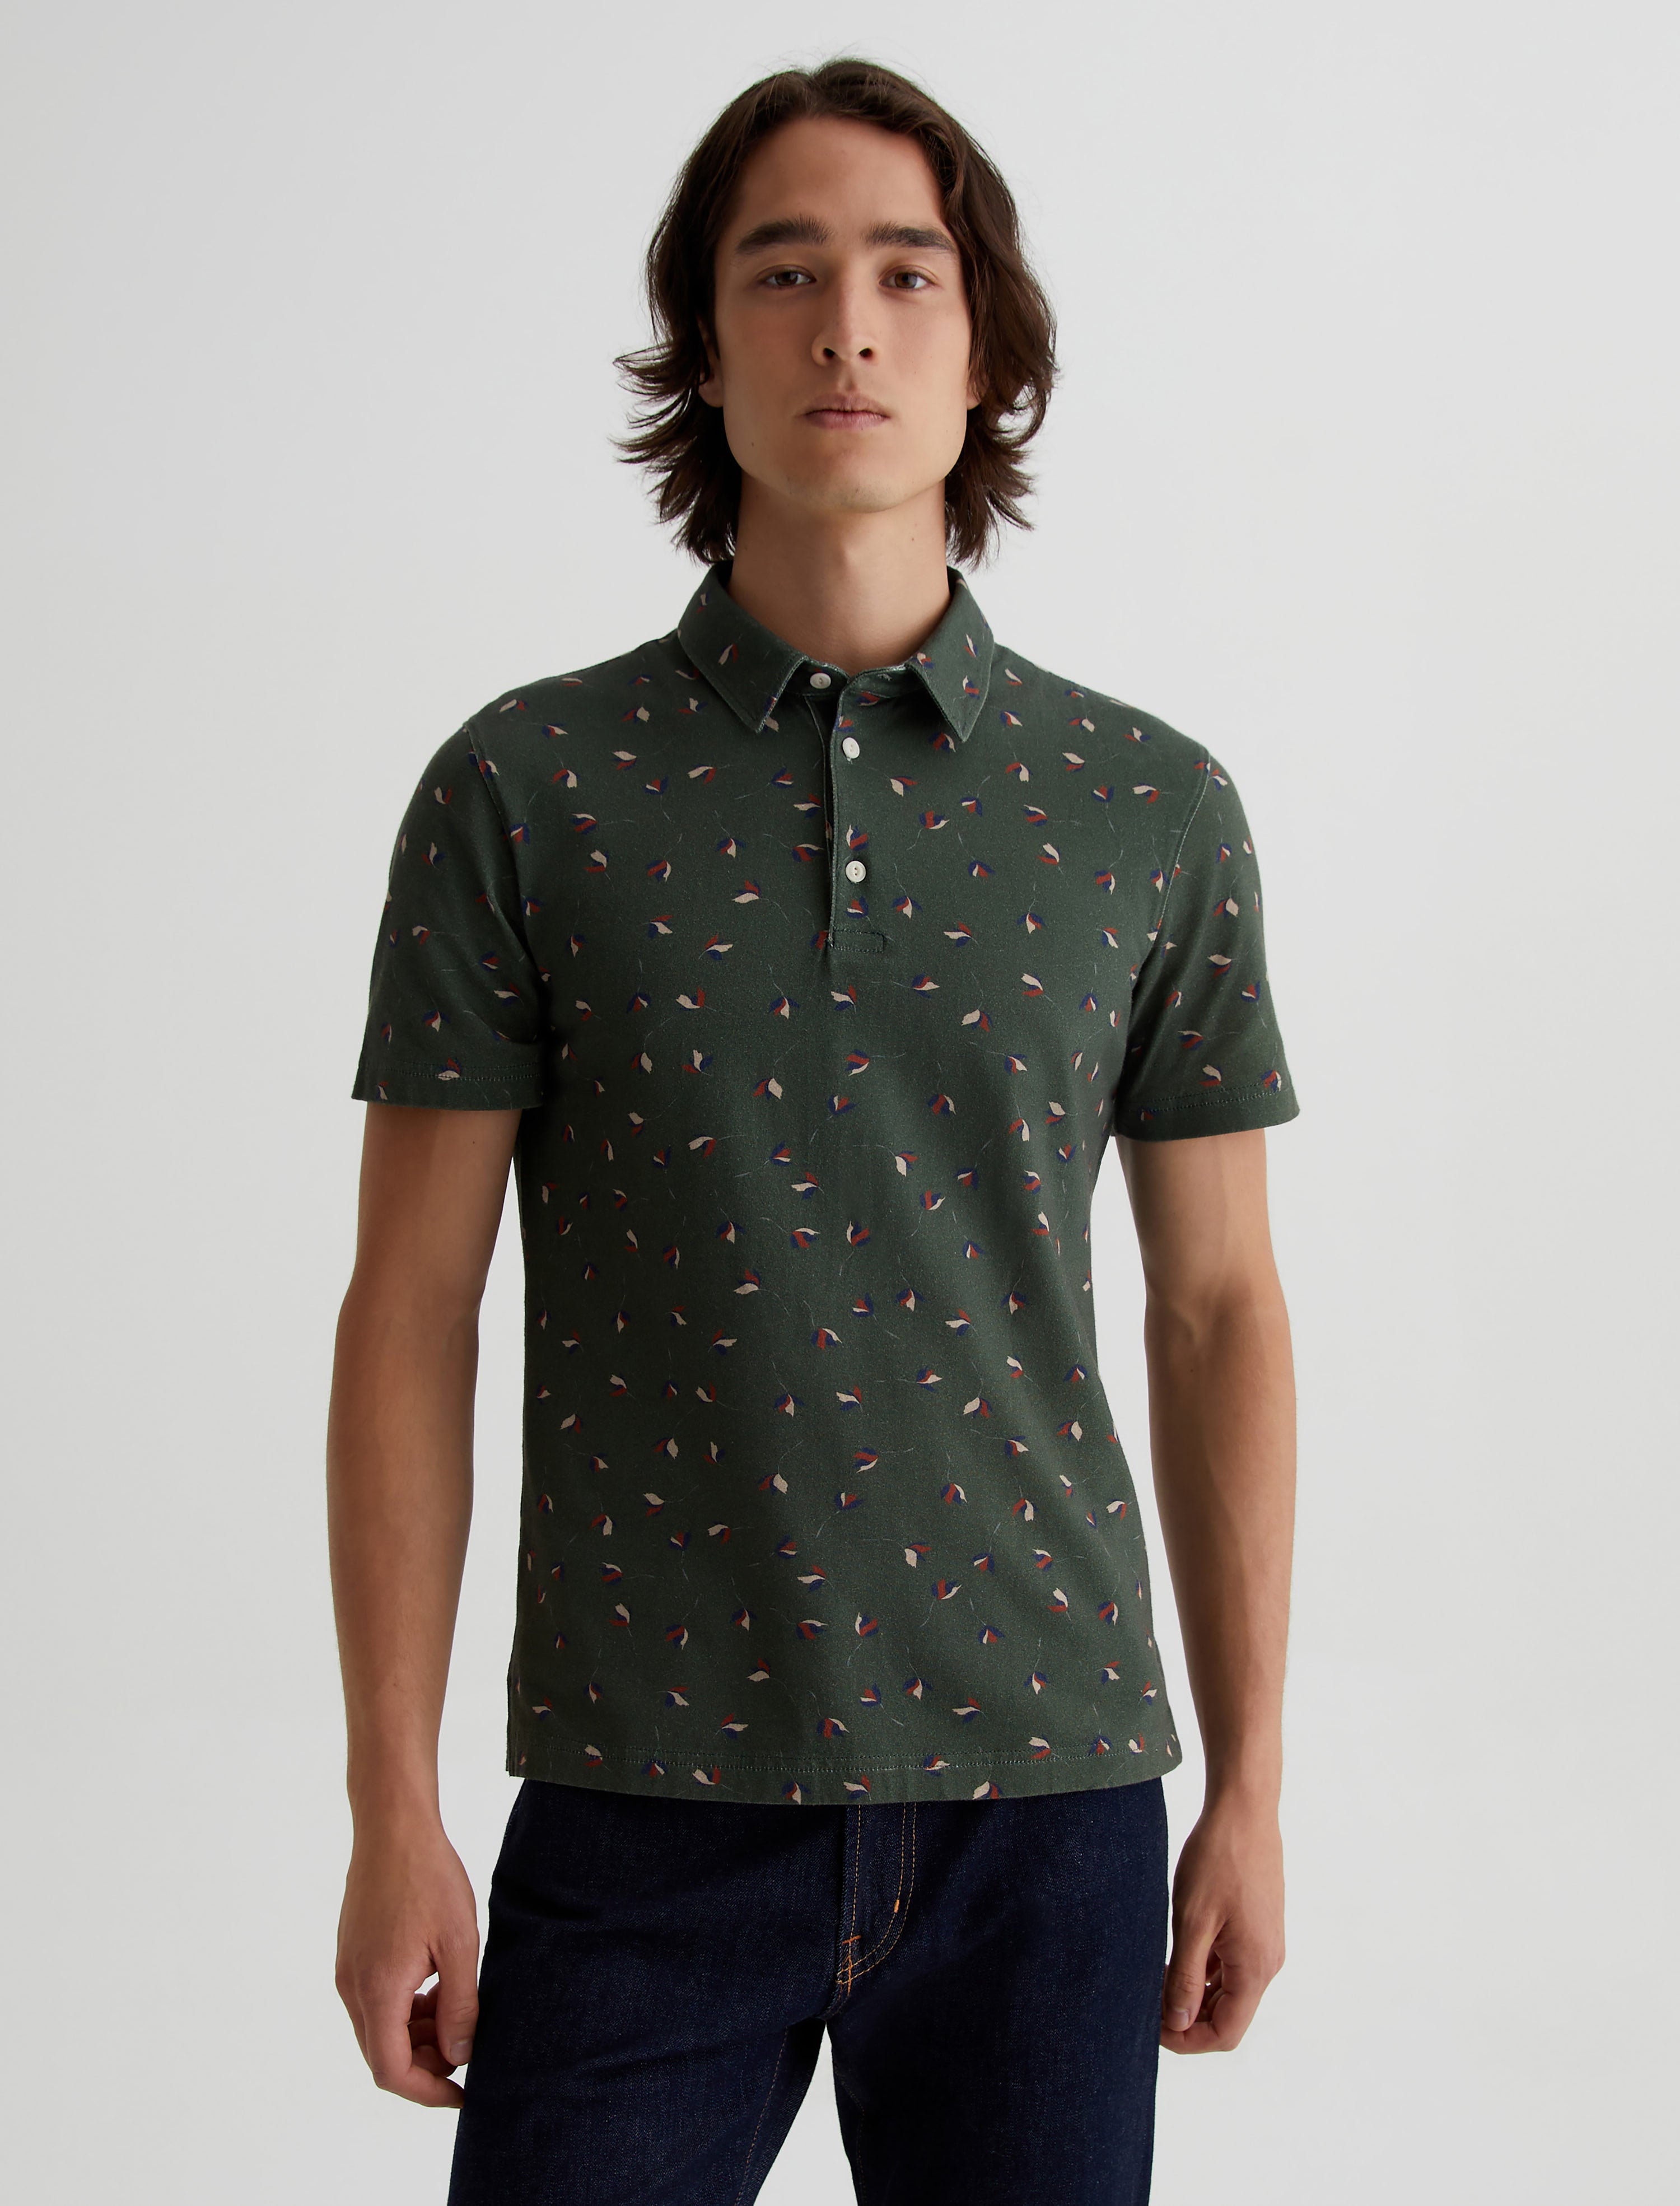 Bryce S/S Polo Fallen Leaves Green Multi Classic Fit Short Sleeve Polo T-Shirt Mens Top Photo 1